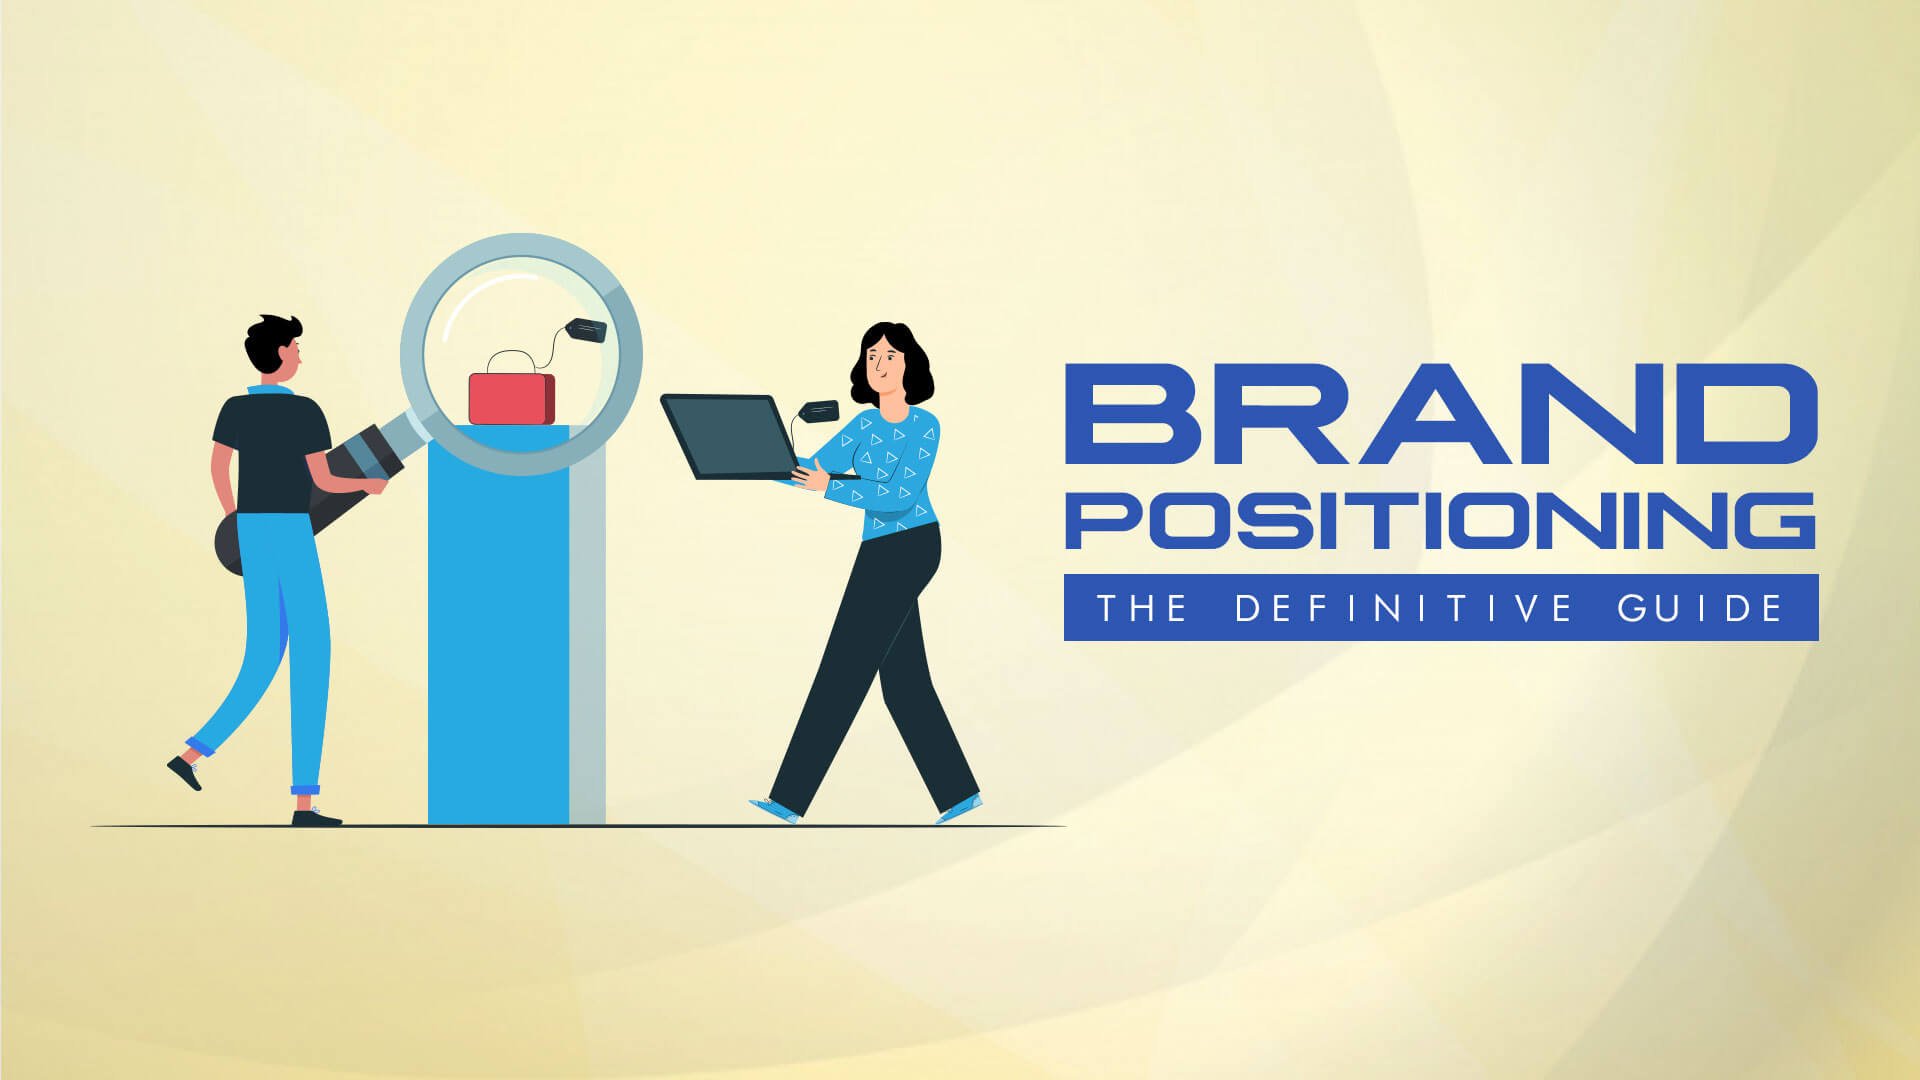 Brand Positioning: The Definitive Guide To Position on Your Brand